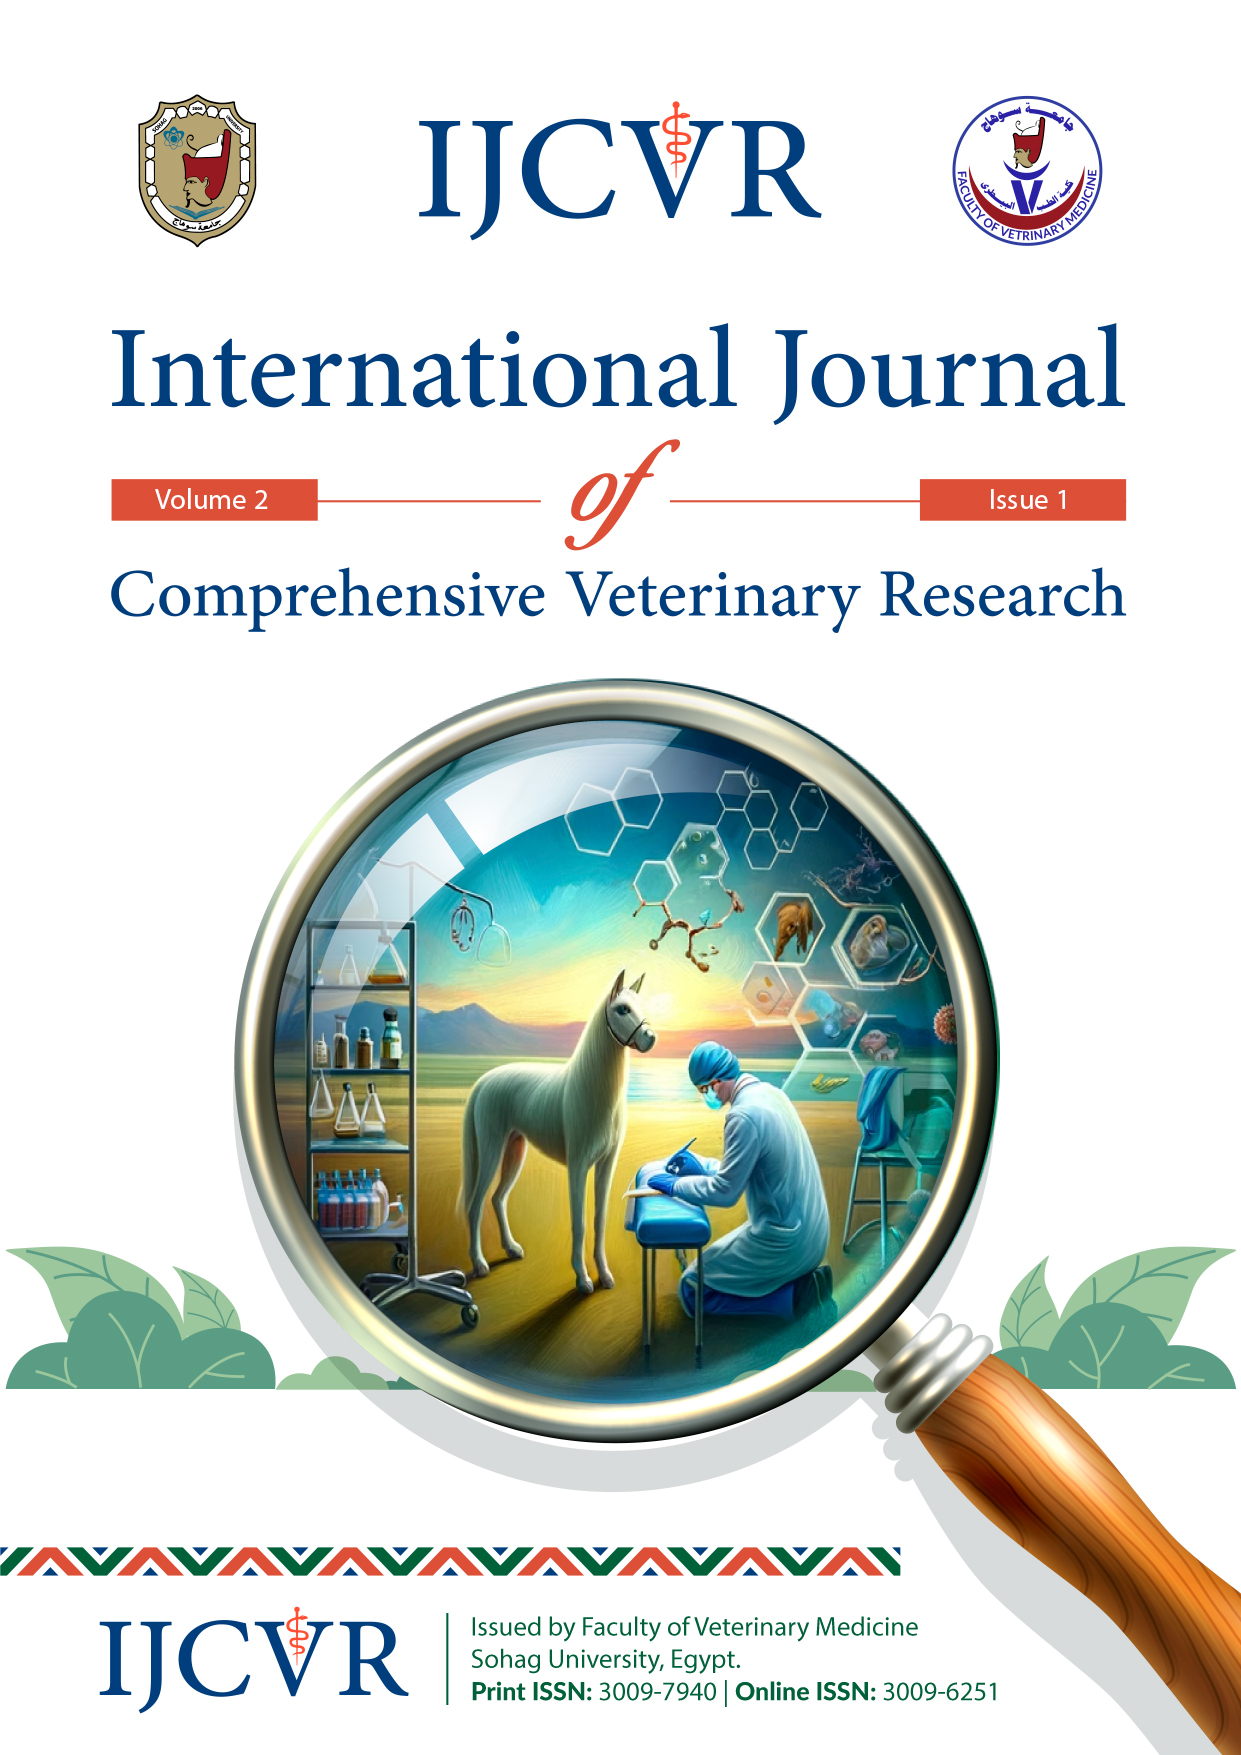 International Journal of Comprehensive Veterinary Research